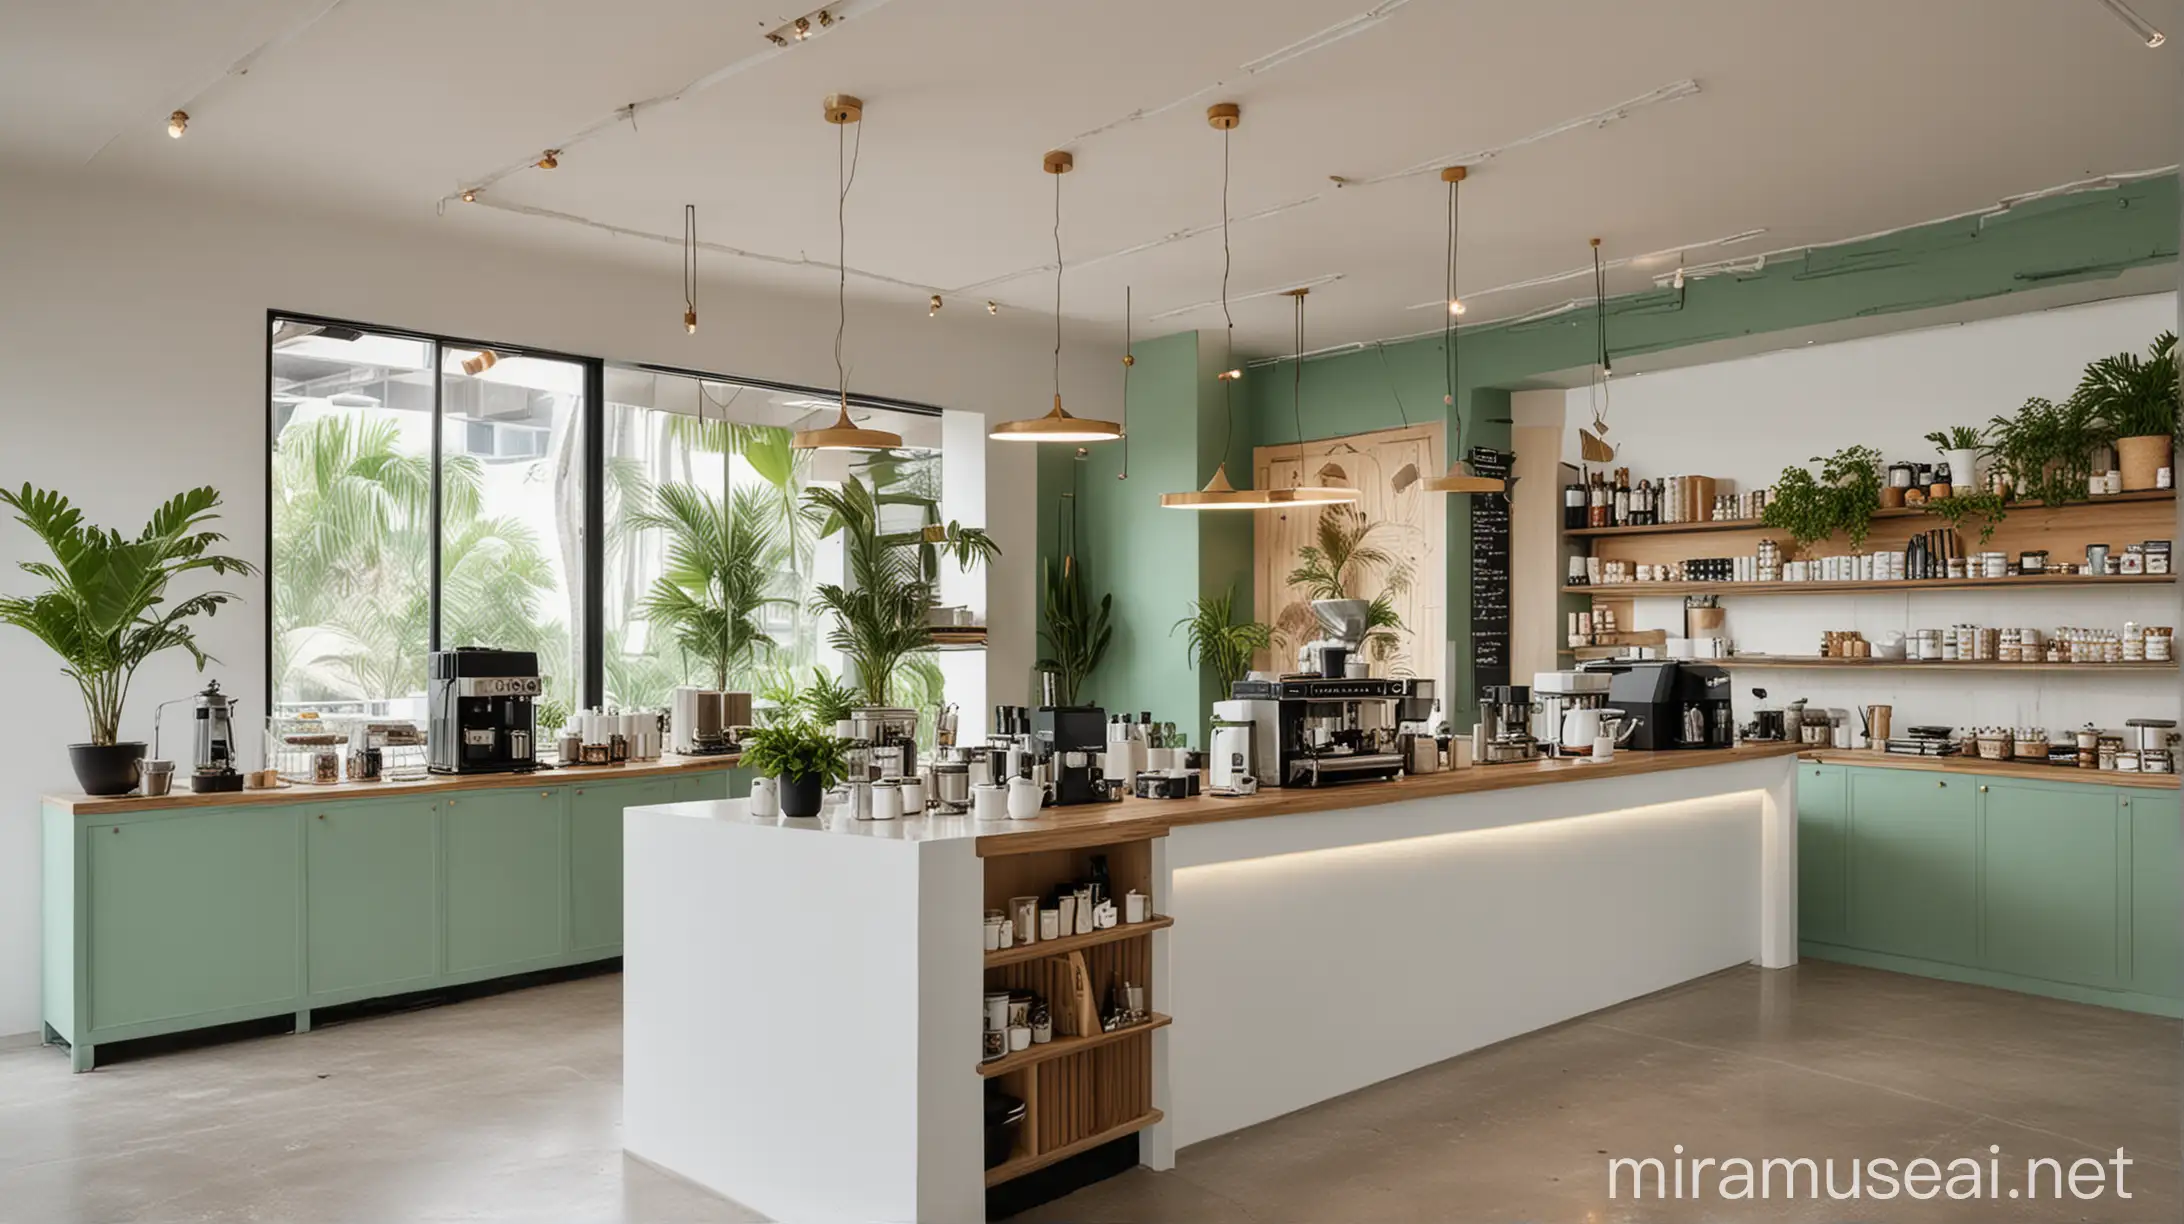 The island showcases coffee, in a modern style, with white and green color